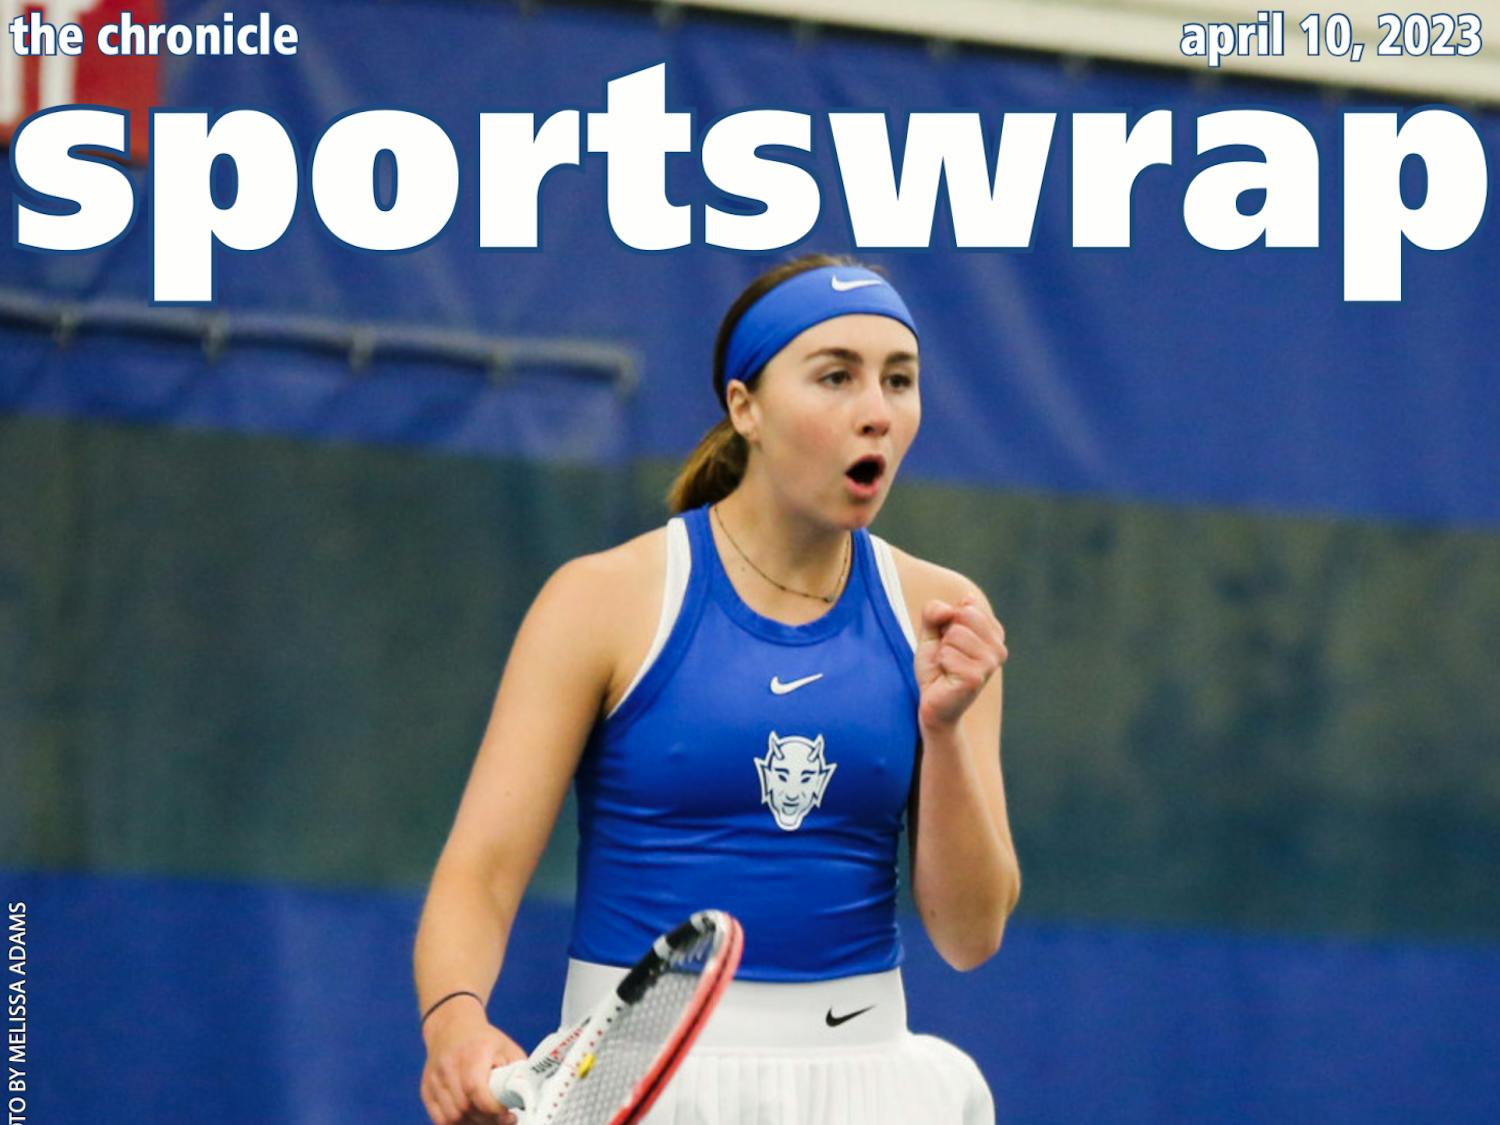 Duke women's tennis knocked off Wake Forest and N.C. State over the weekend.